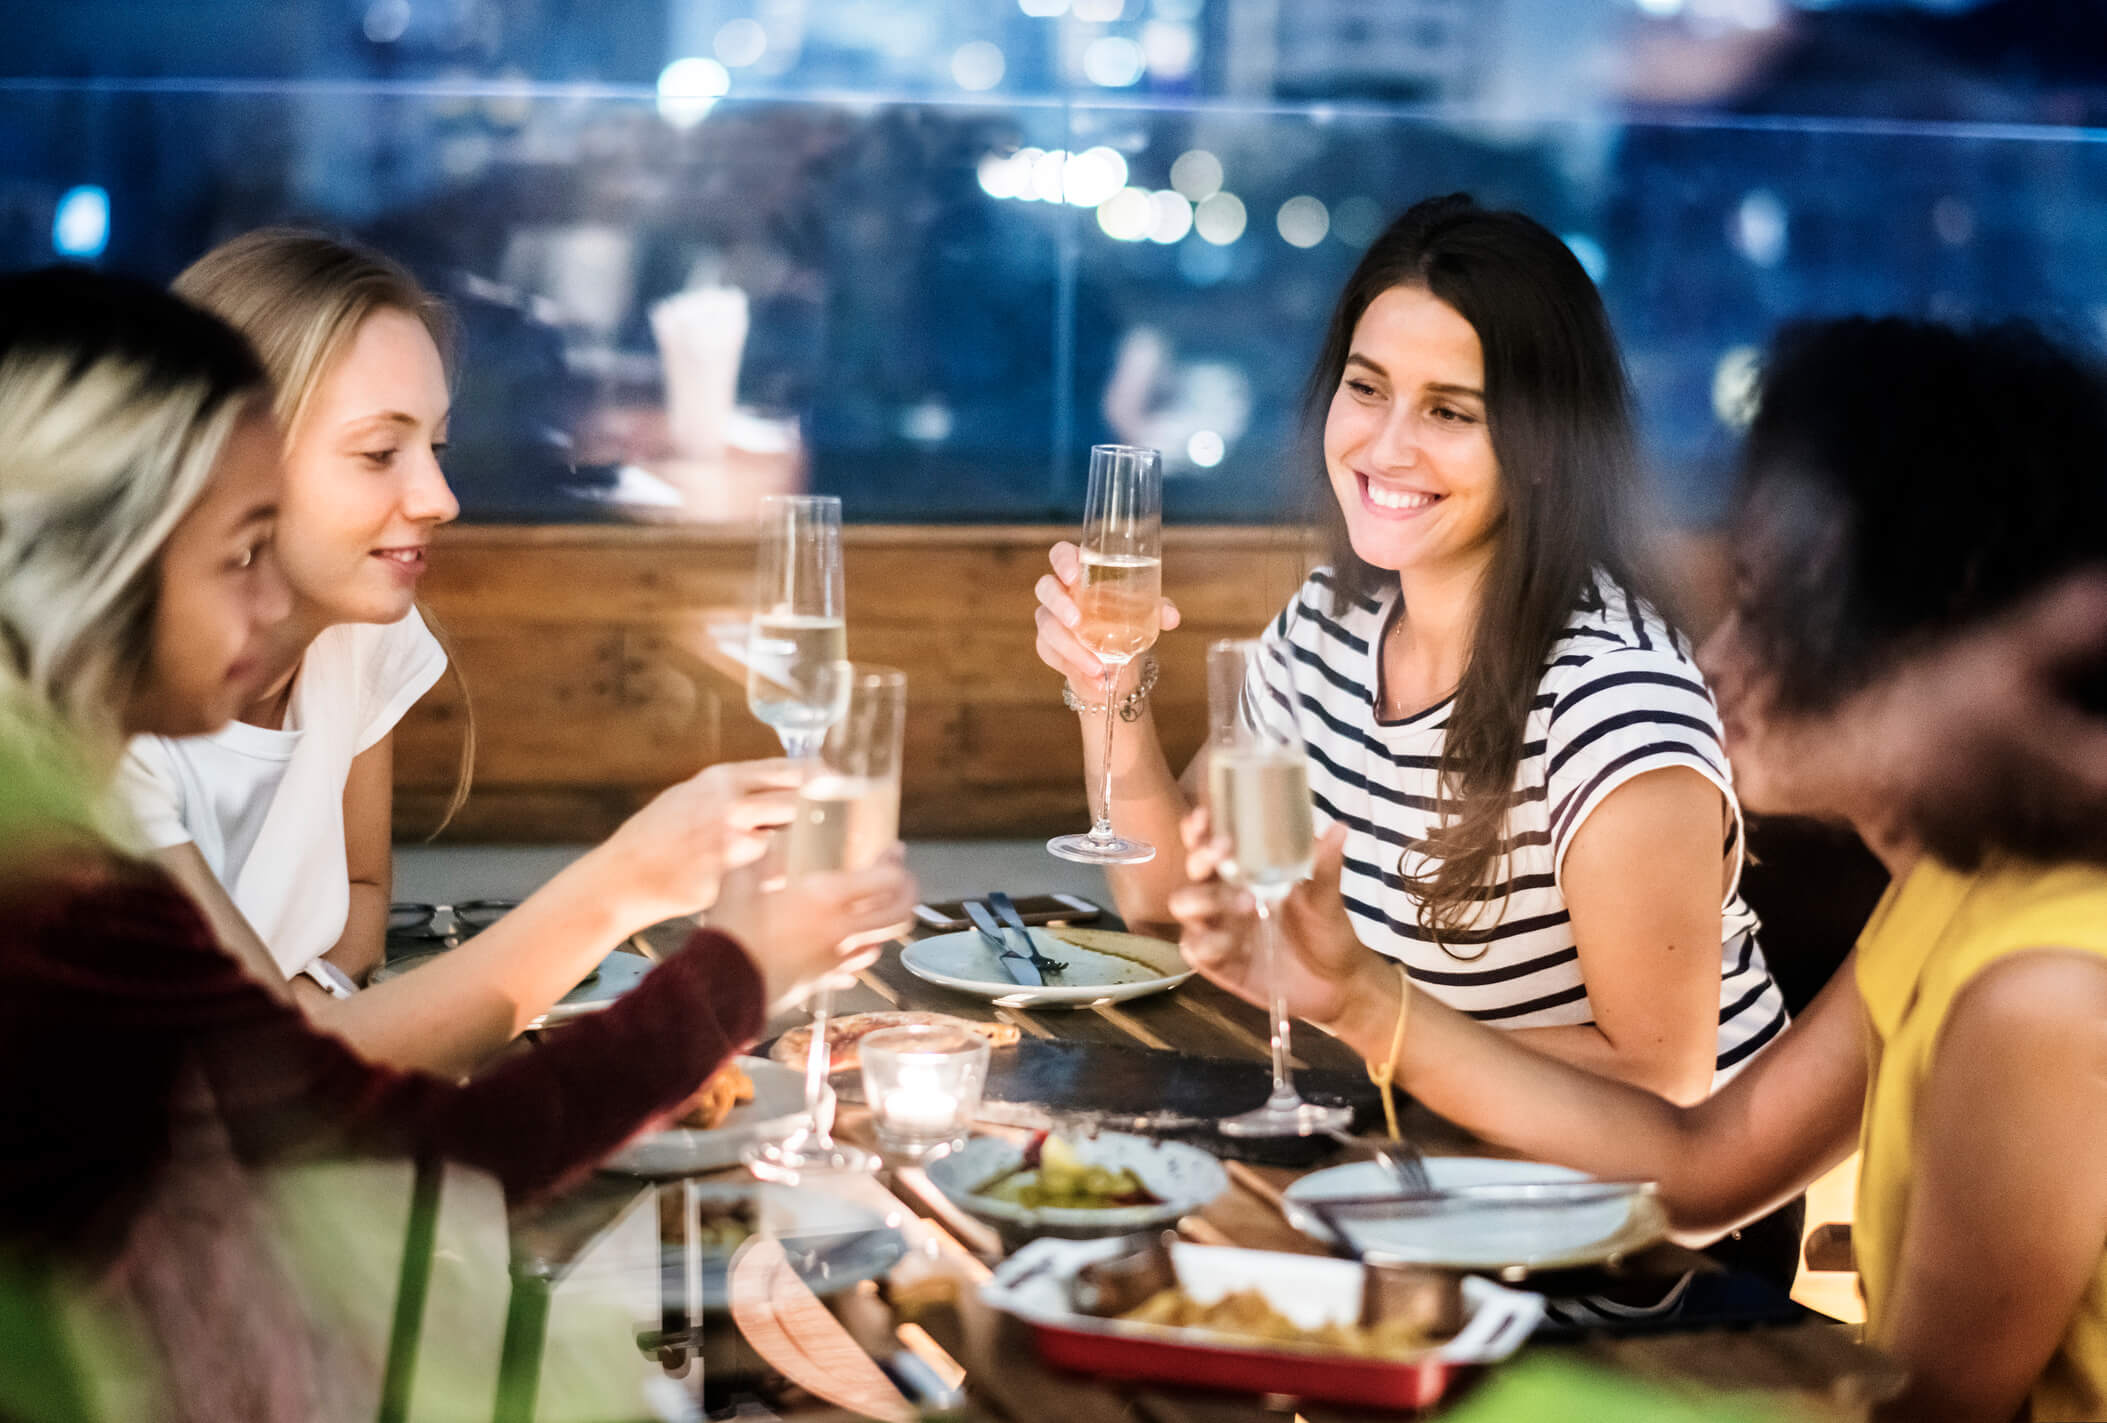 4 Tips to Show You Value Your Women Guests, Coworkers and Employees